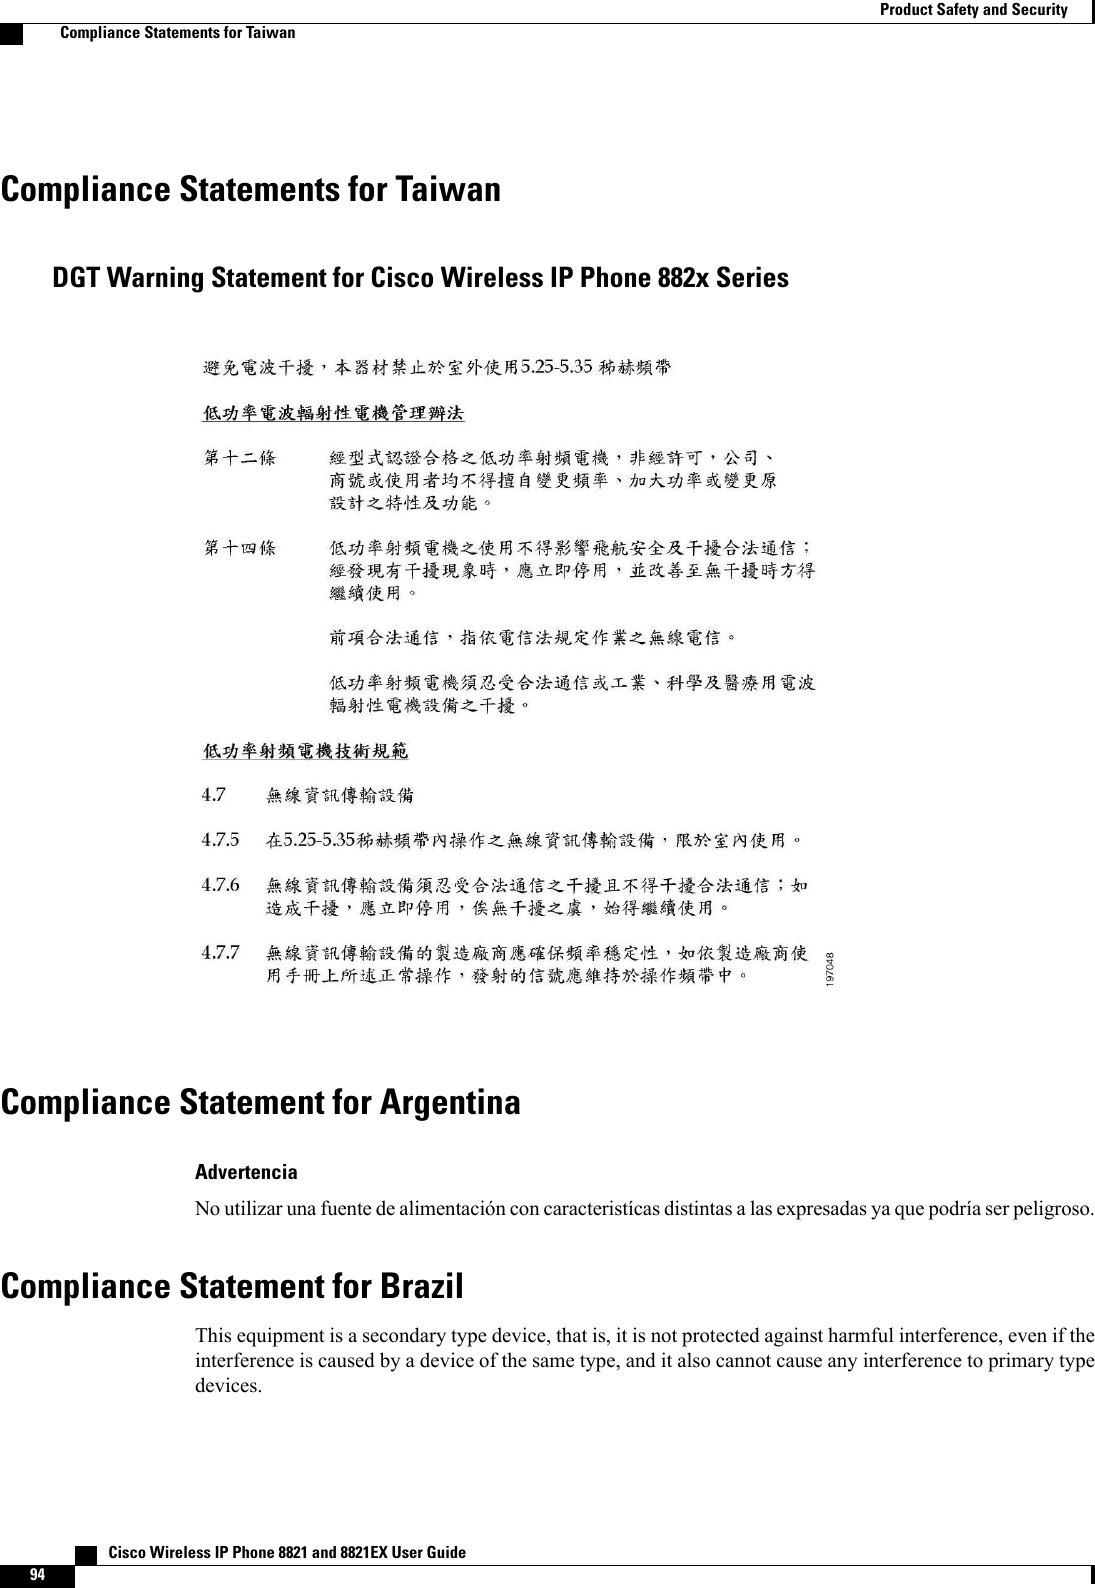 Compliance Statements for TaiwanDGT Warning Statement for Cisco Wireless IP Phone 882x SeriesCompliance Statement for ArgentinaAdvertenciaNo utilizar una fuente de alimentación con caracteristícas distintas alas expresadas ya que podría ser peligroso.Compliance Statement for BrazilThis equipment is a secondary type device, that is, it is not protected against harmful interference, even if theinterference is caused by a device of the same type, and it also cannot cause any interference to primary typedevices.   Cisco Wireless IP Phone 8821 and 8821EX User Guide94Product Safety and SecurityCompliance Statements for Taiwan